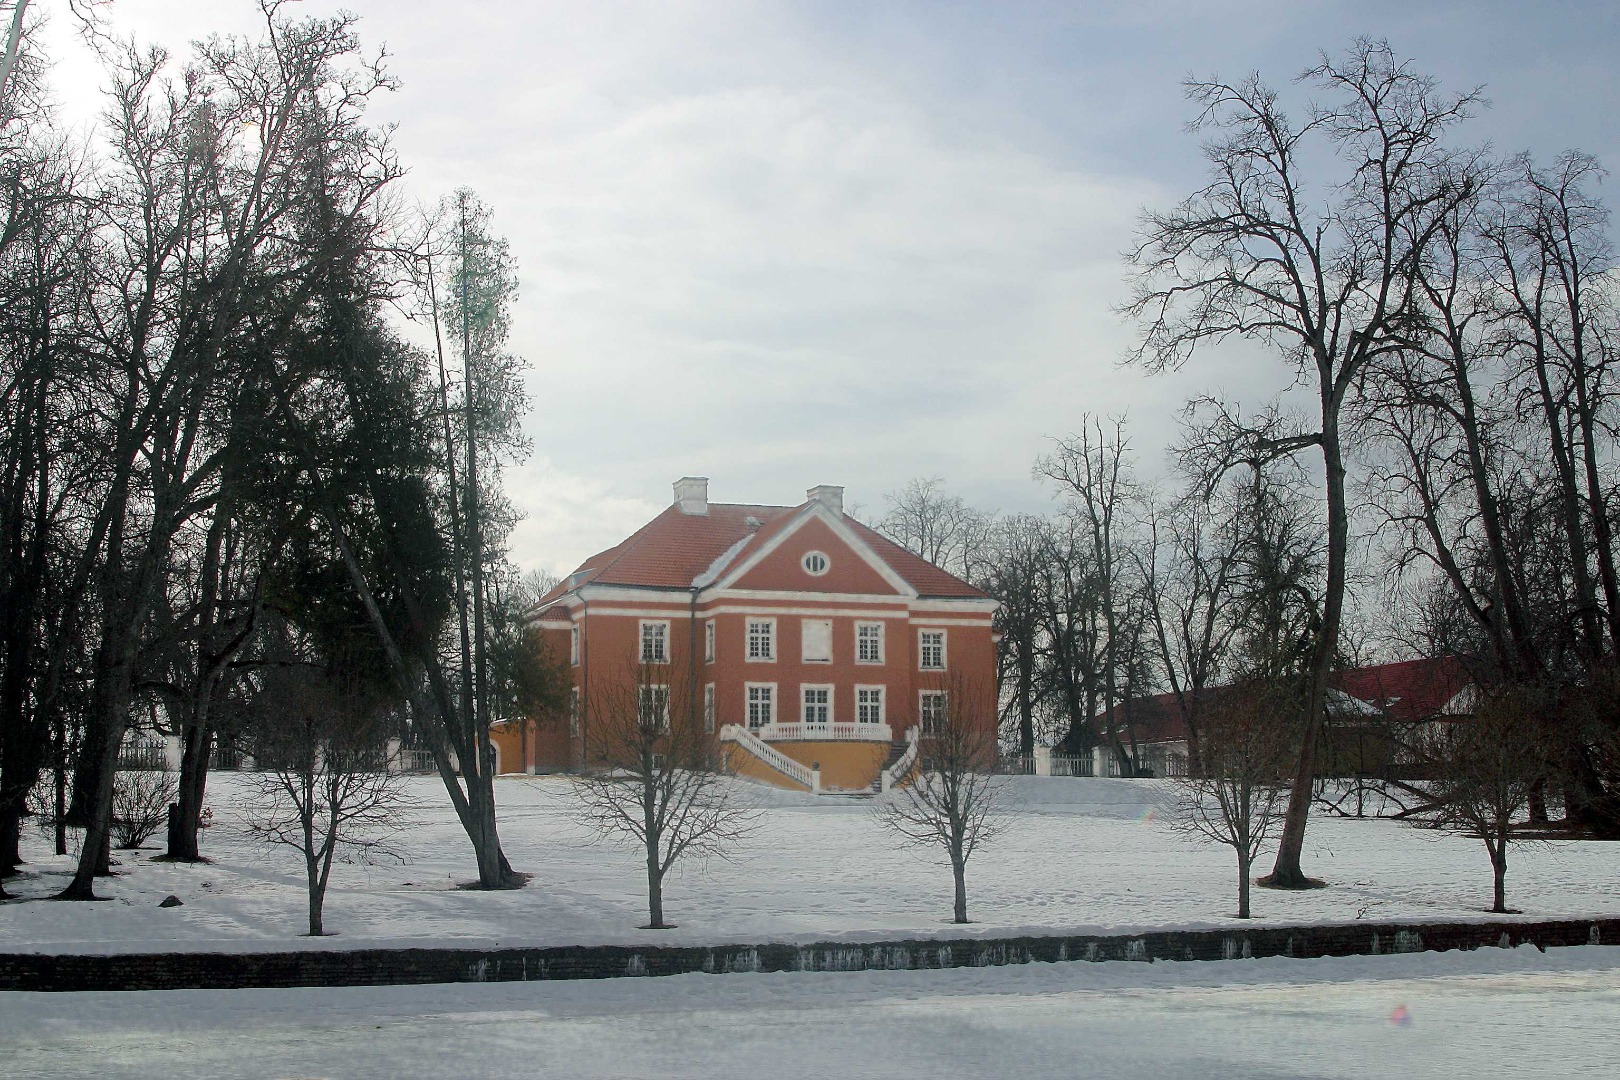 Palmse Manor's Gentleman House (the present appearance received 1782-85) rephoto